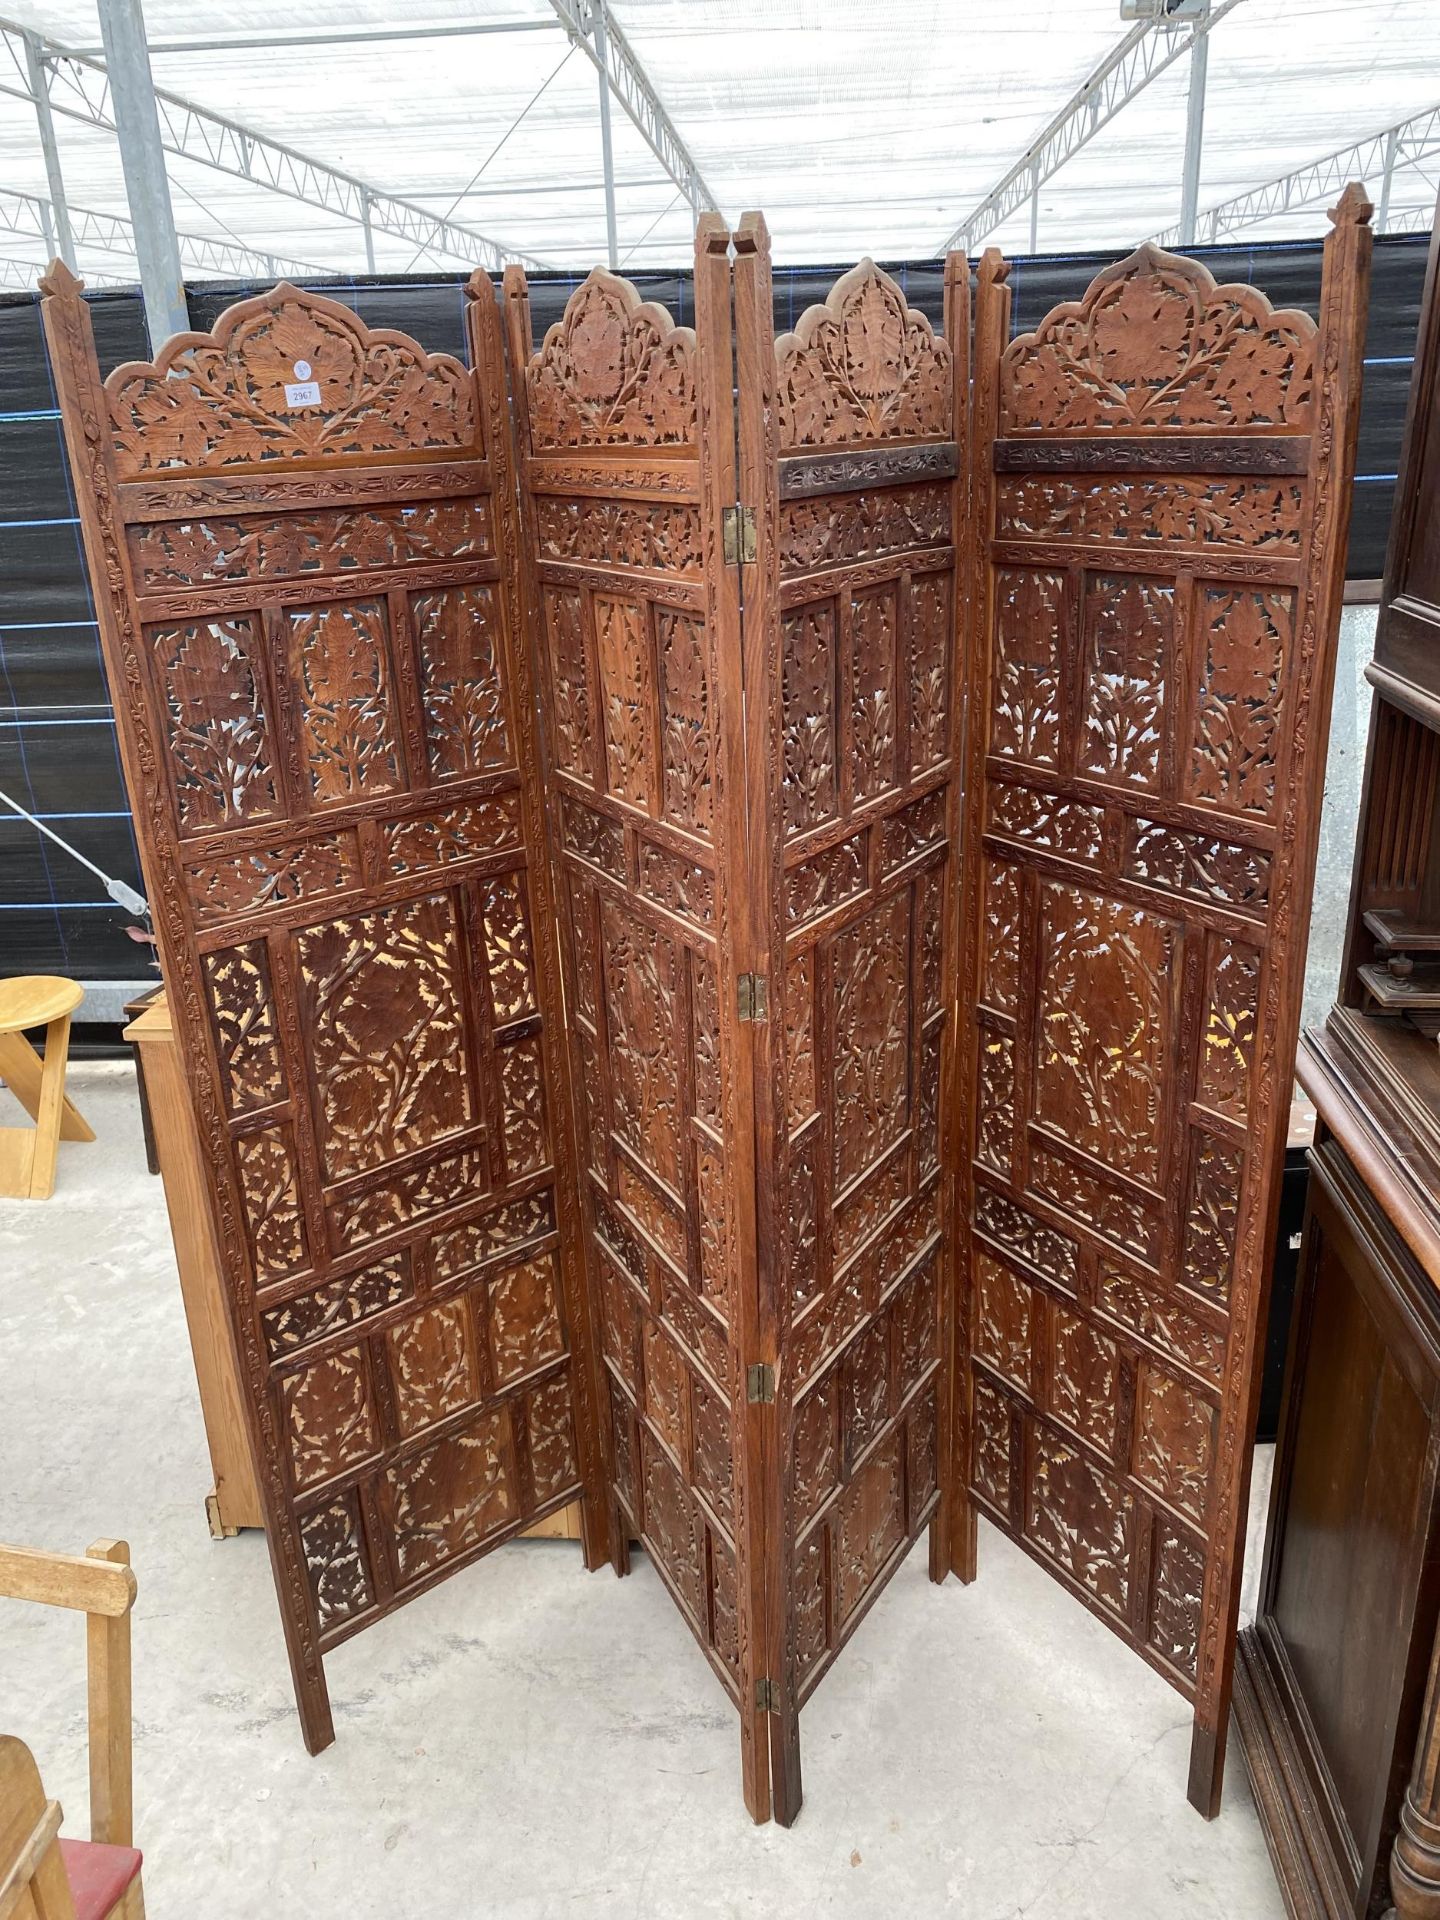 A PROFUSELY CARVED HARDWOOD MOROCCAN DIVISION SCREEN, EACH PANEL, 71" HIGH AND 19.5" WIDE